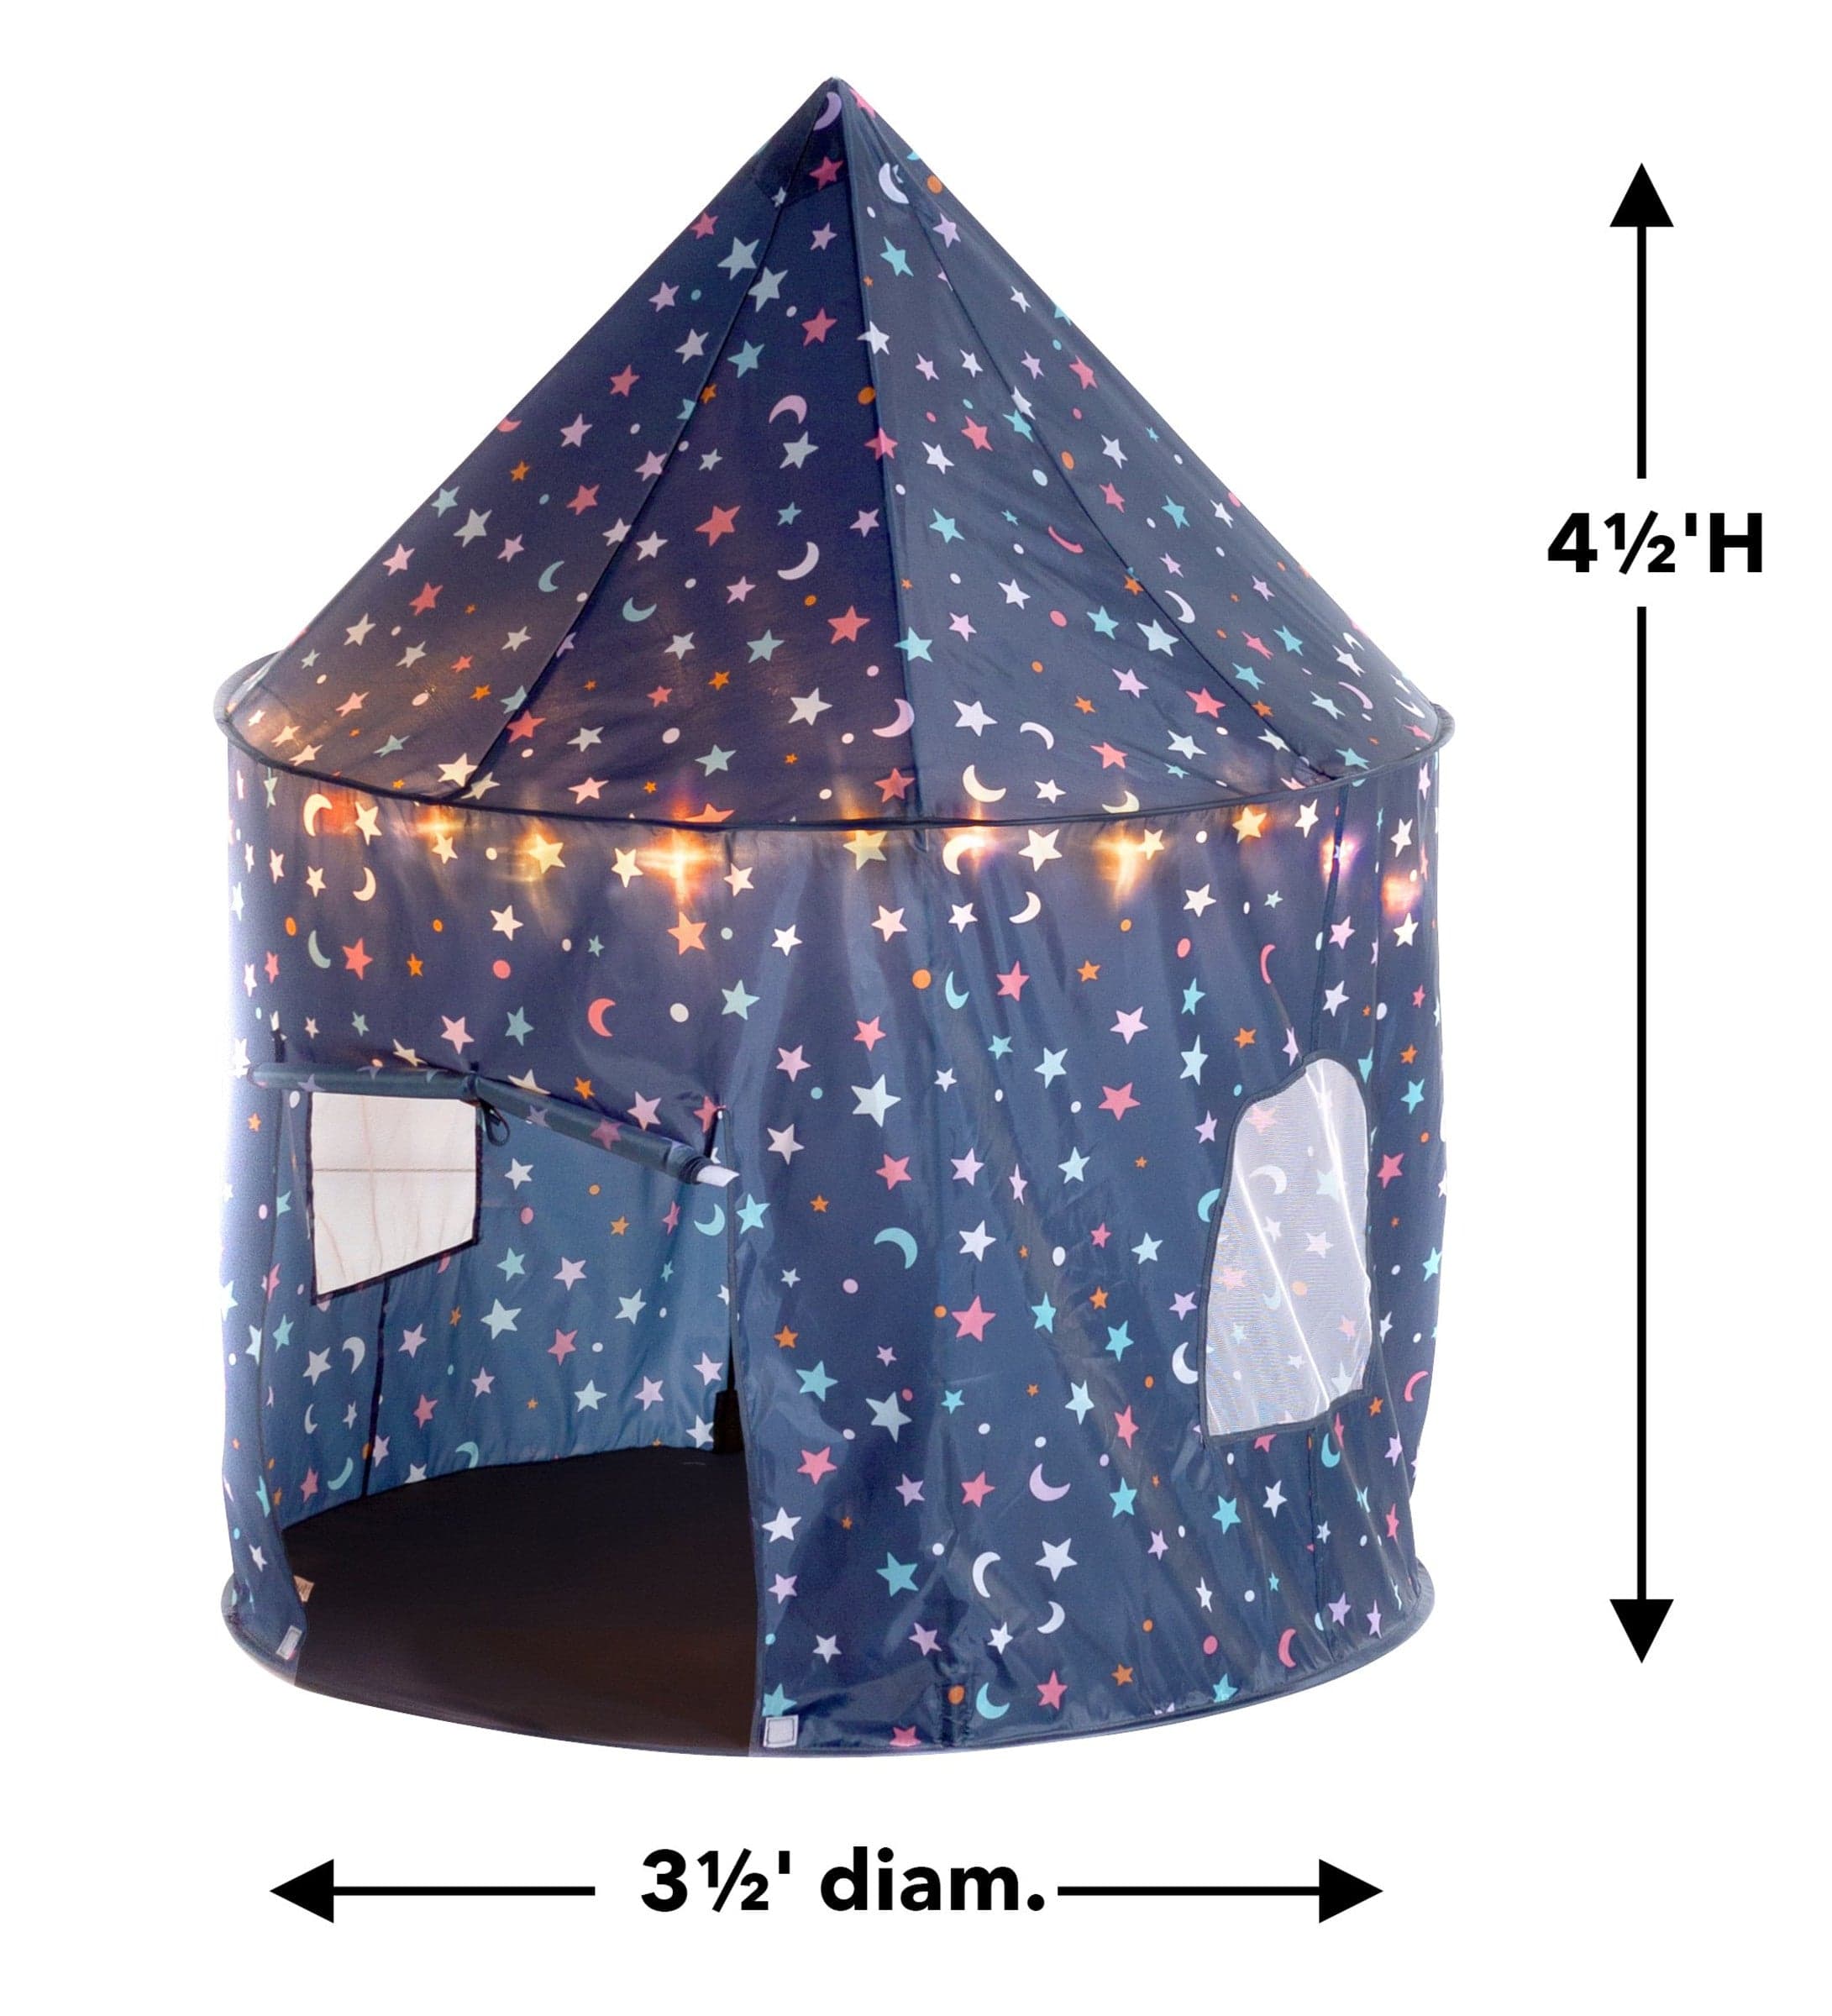 53-Inch Celestial Pop-Up Play Tent with Lights – Hearthsong